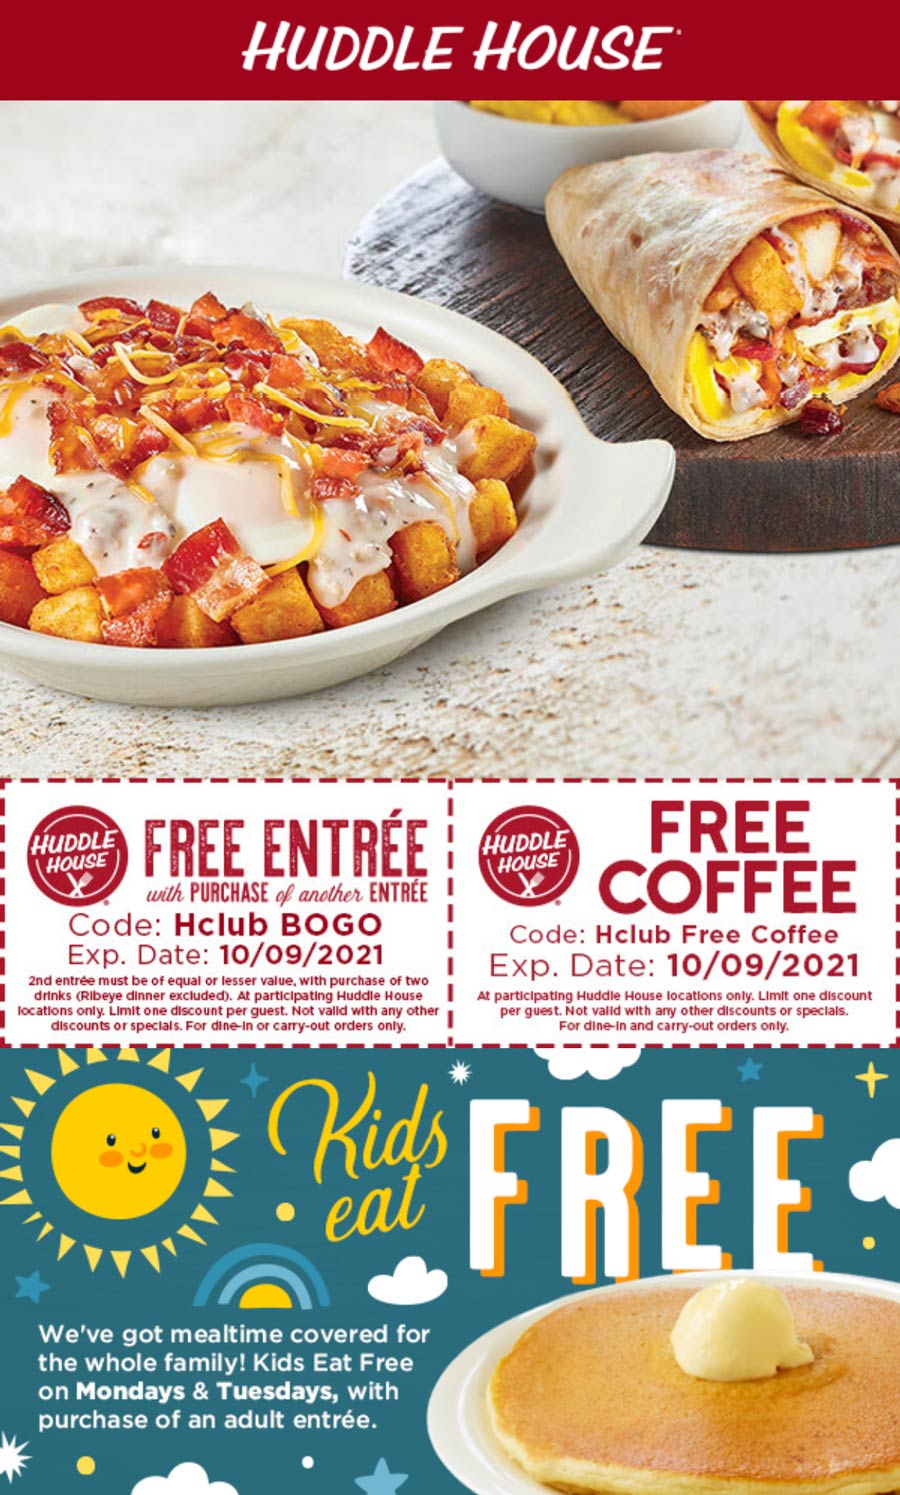 [June, 2022] Second entree free & free coffee at Huddle House 